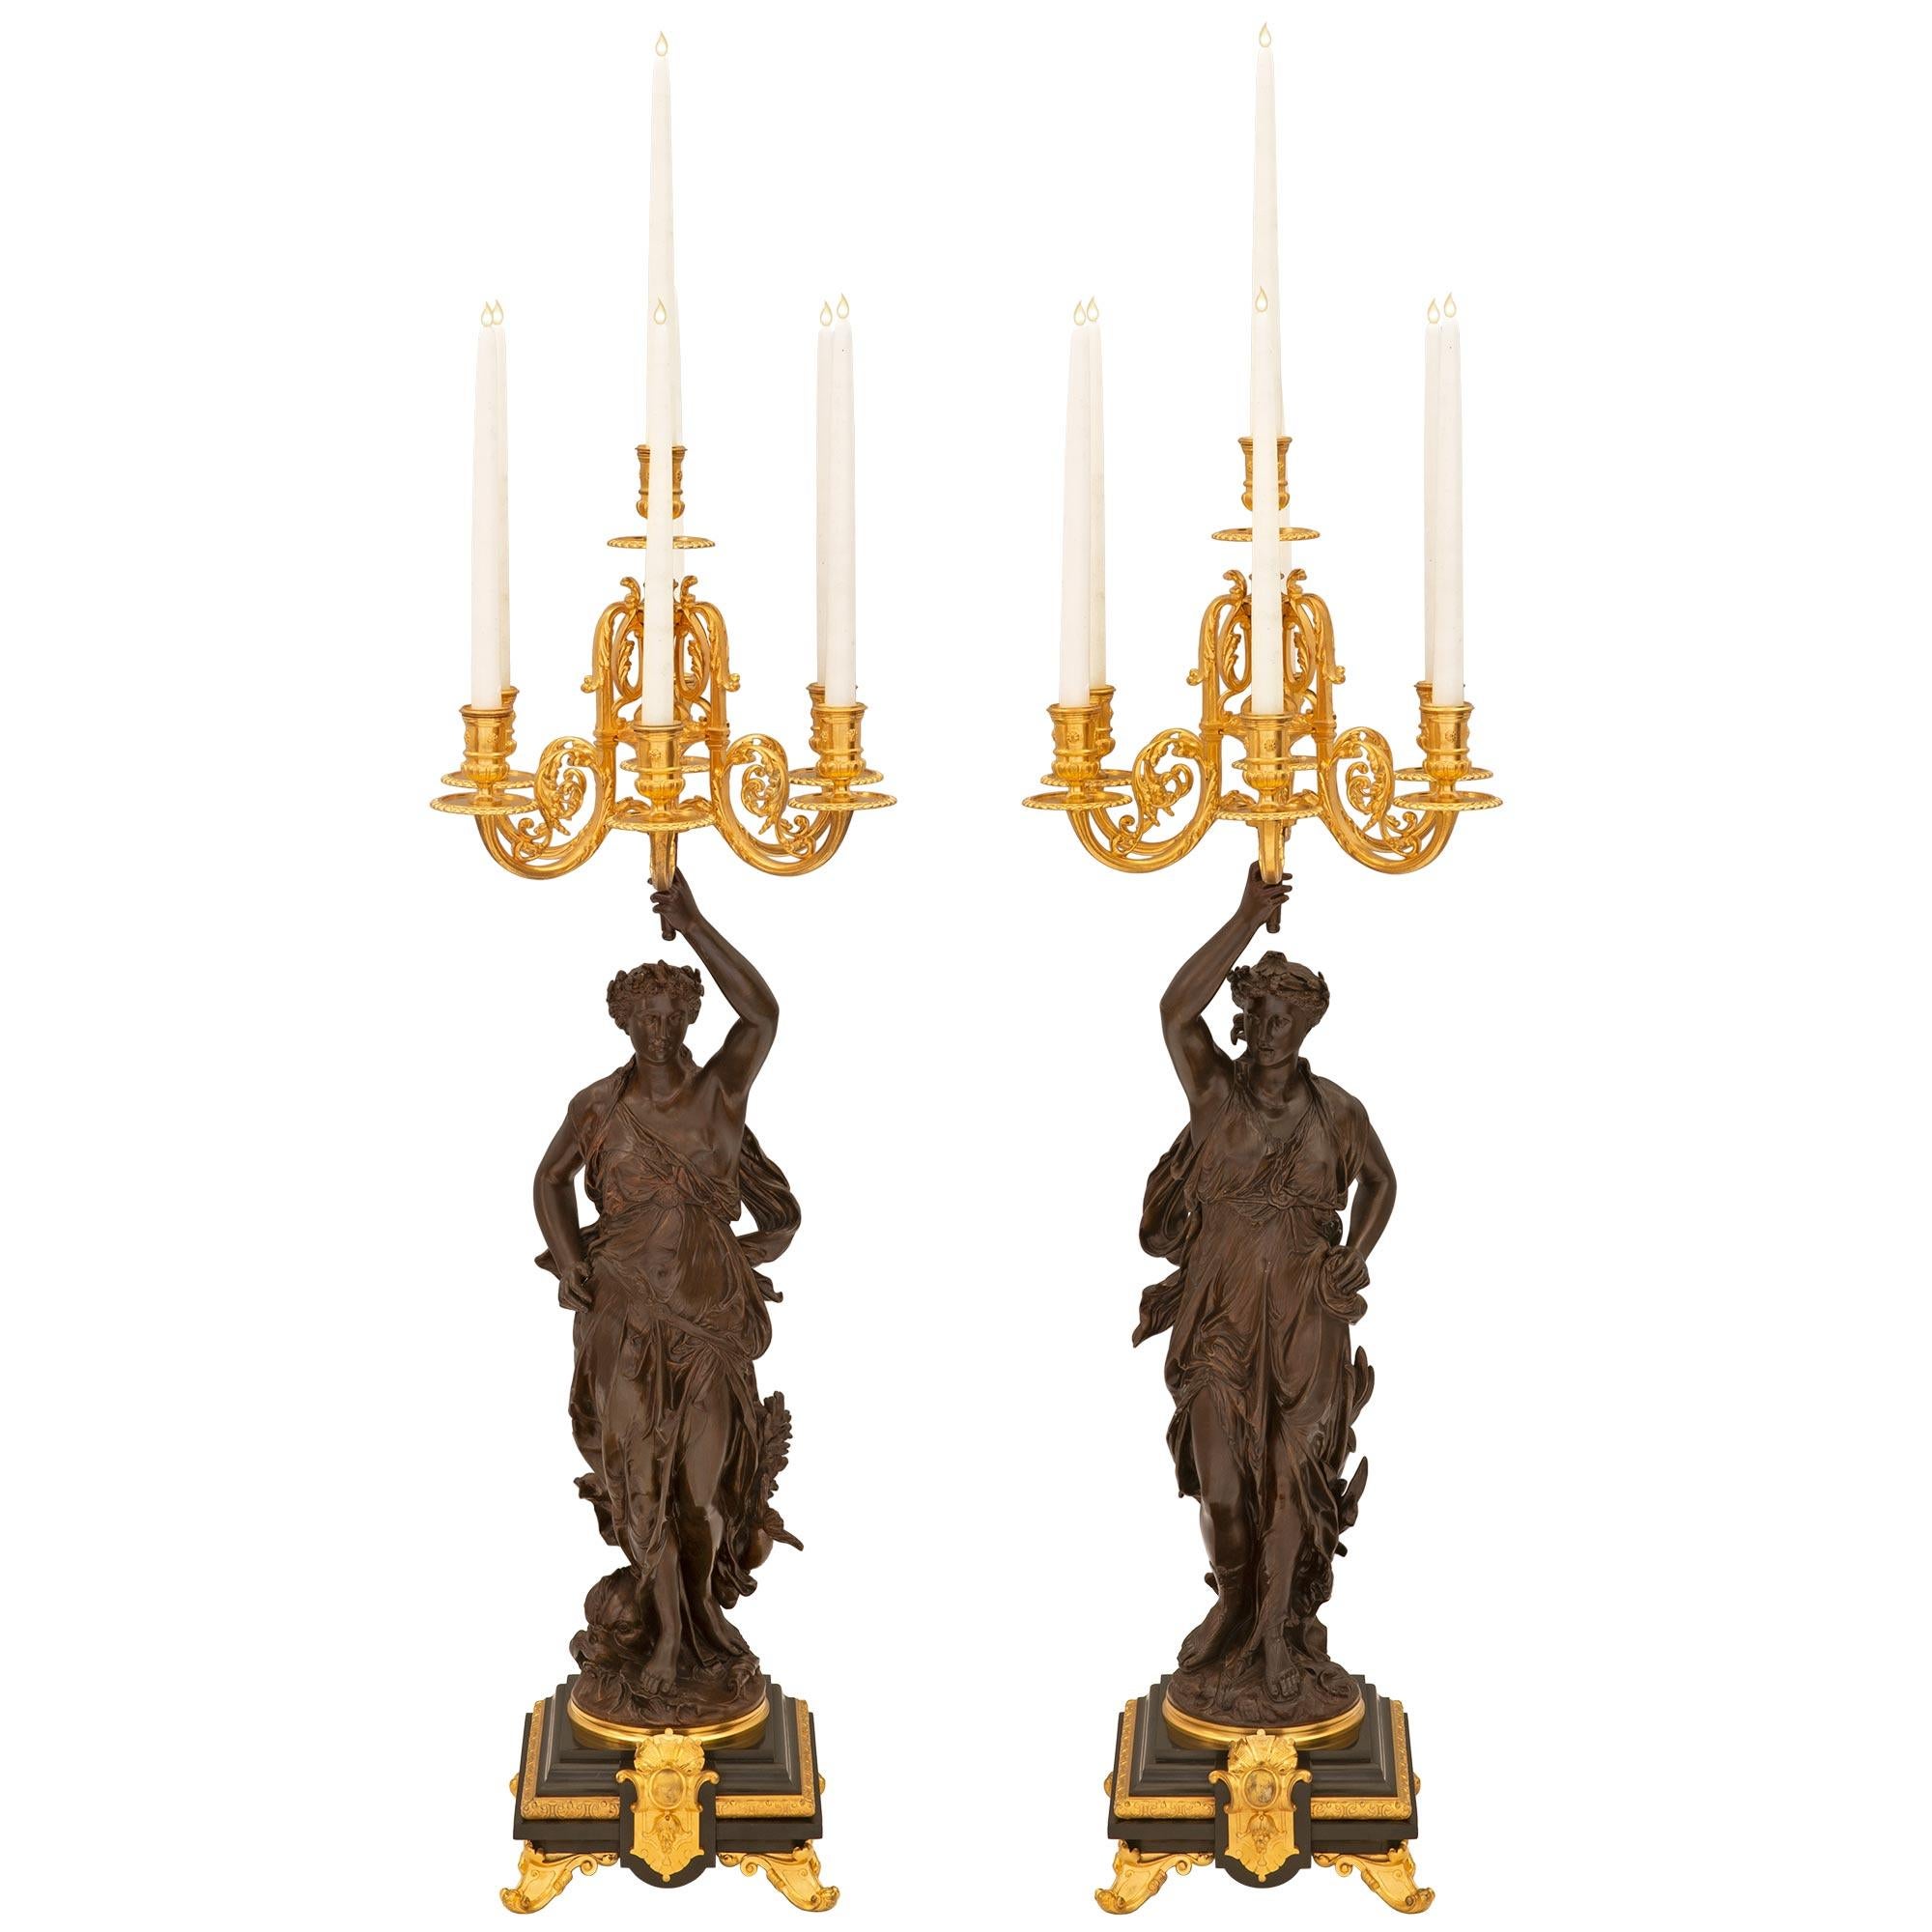 Pair of French 19th Century Renaissance St. Bronze, Ormolu, & Marble Candelbras For Sale 9